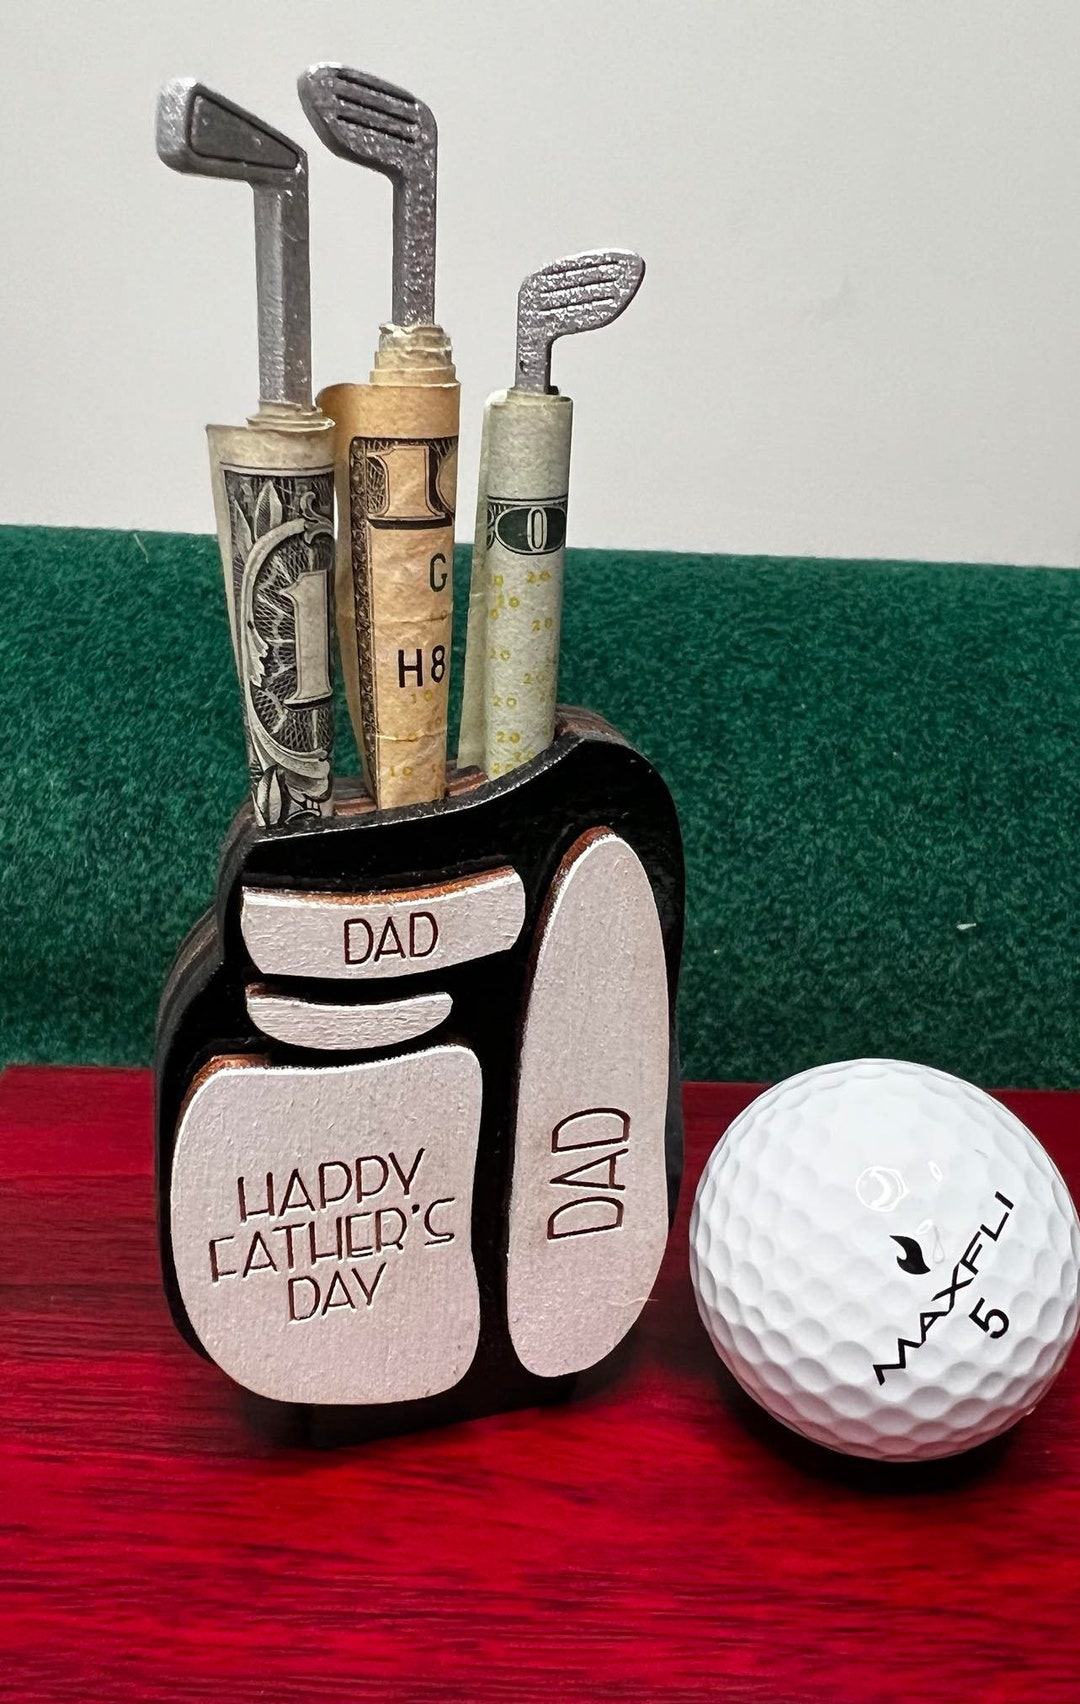  Personalized Golf Gift for Men Unique - Customized Golf Ball  Marker Gift with Luxury Box, Gifts for Golfers Men, Funny Golf Gift for  Grandpa, Dad, Him, Boss, Lover on Anniversary